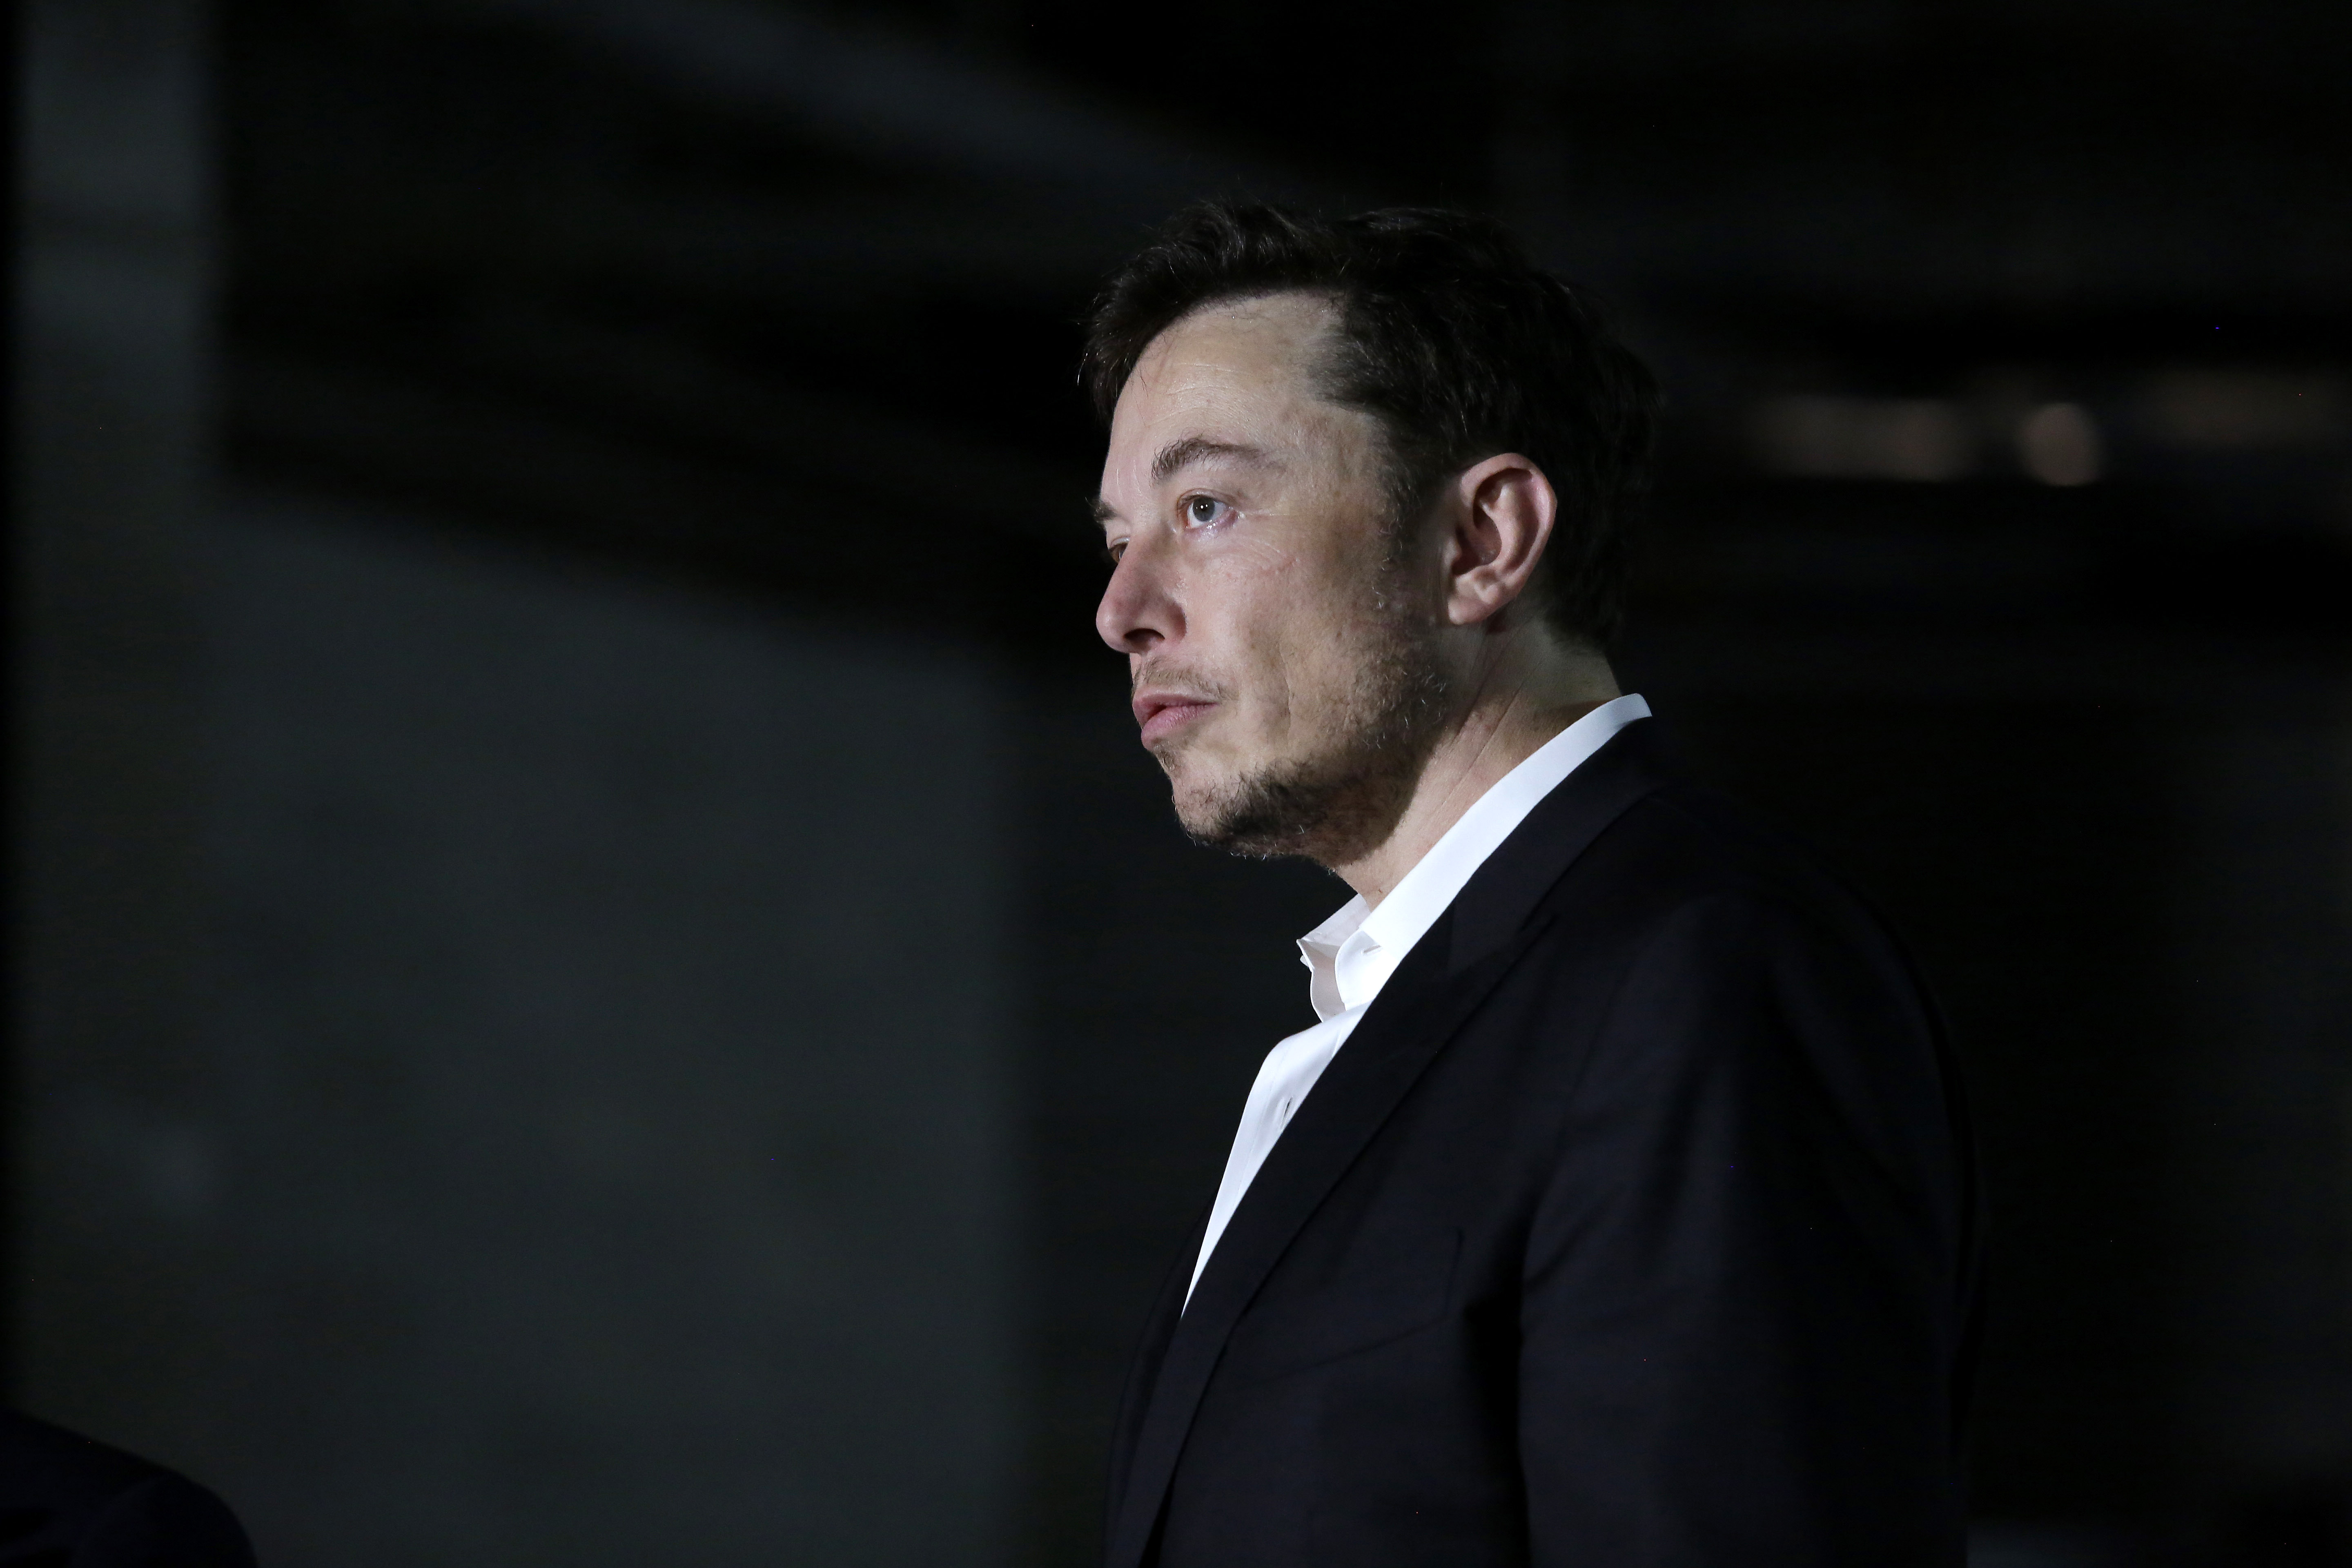 Elon Musk on taking Tesla private: ‘That ship has sailed’